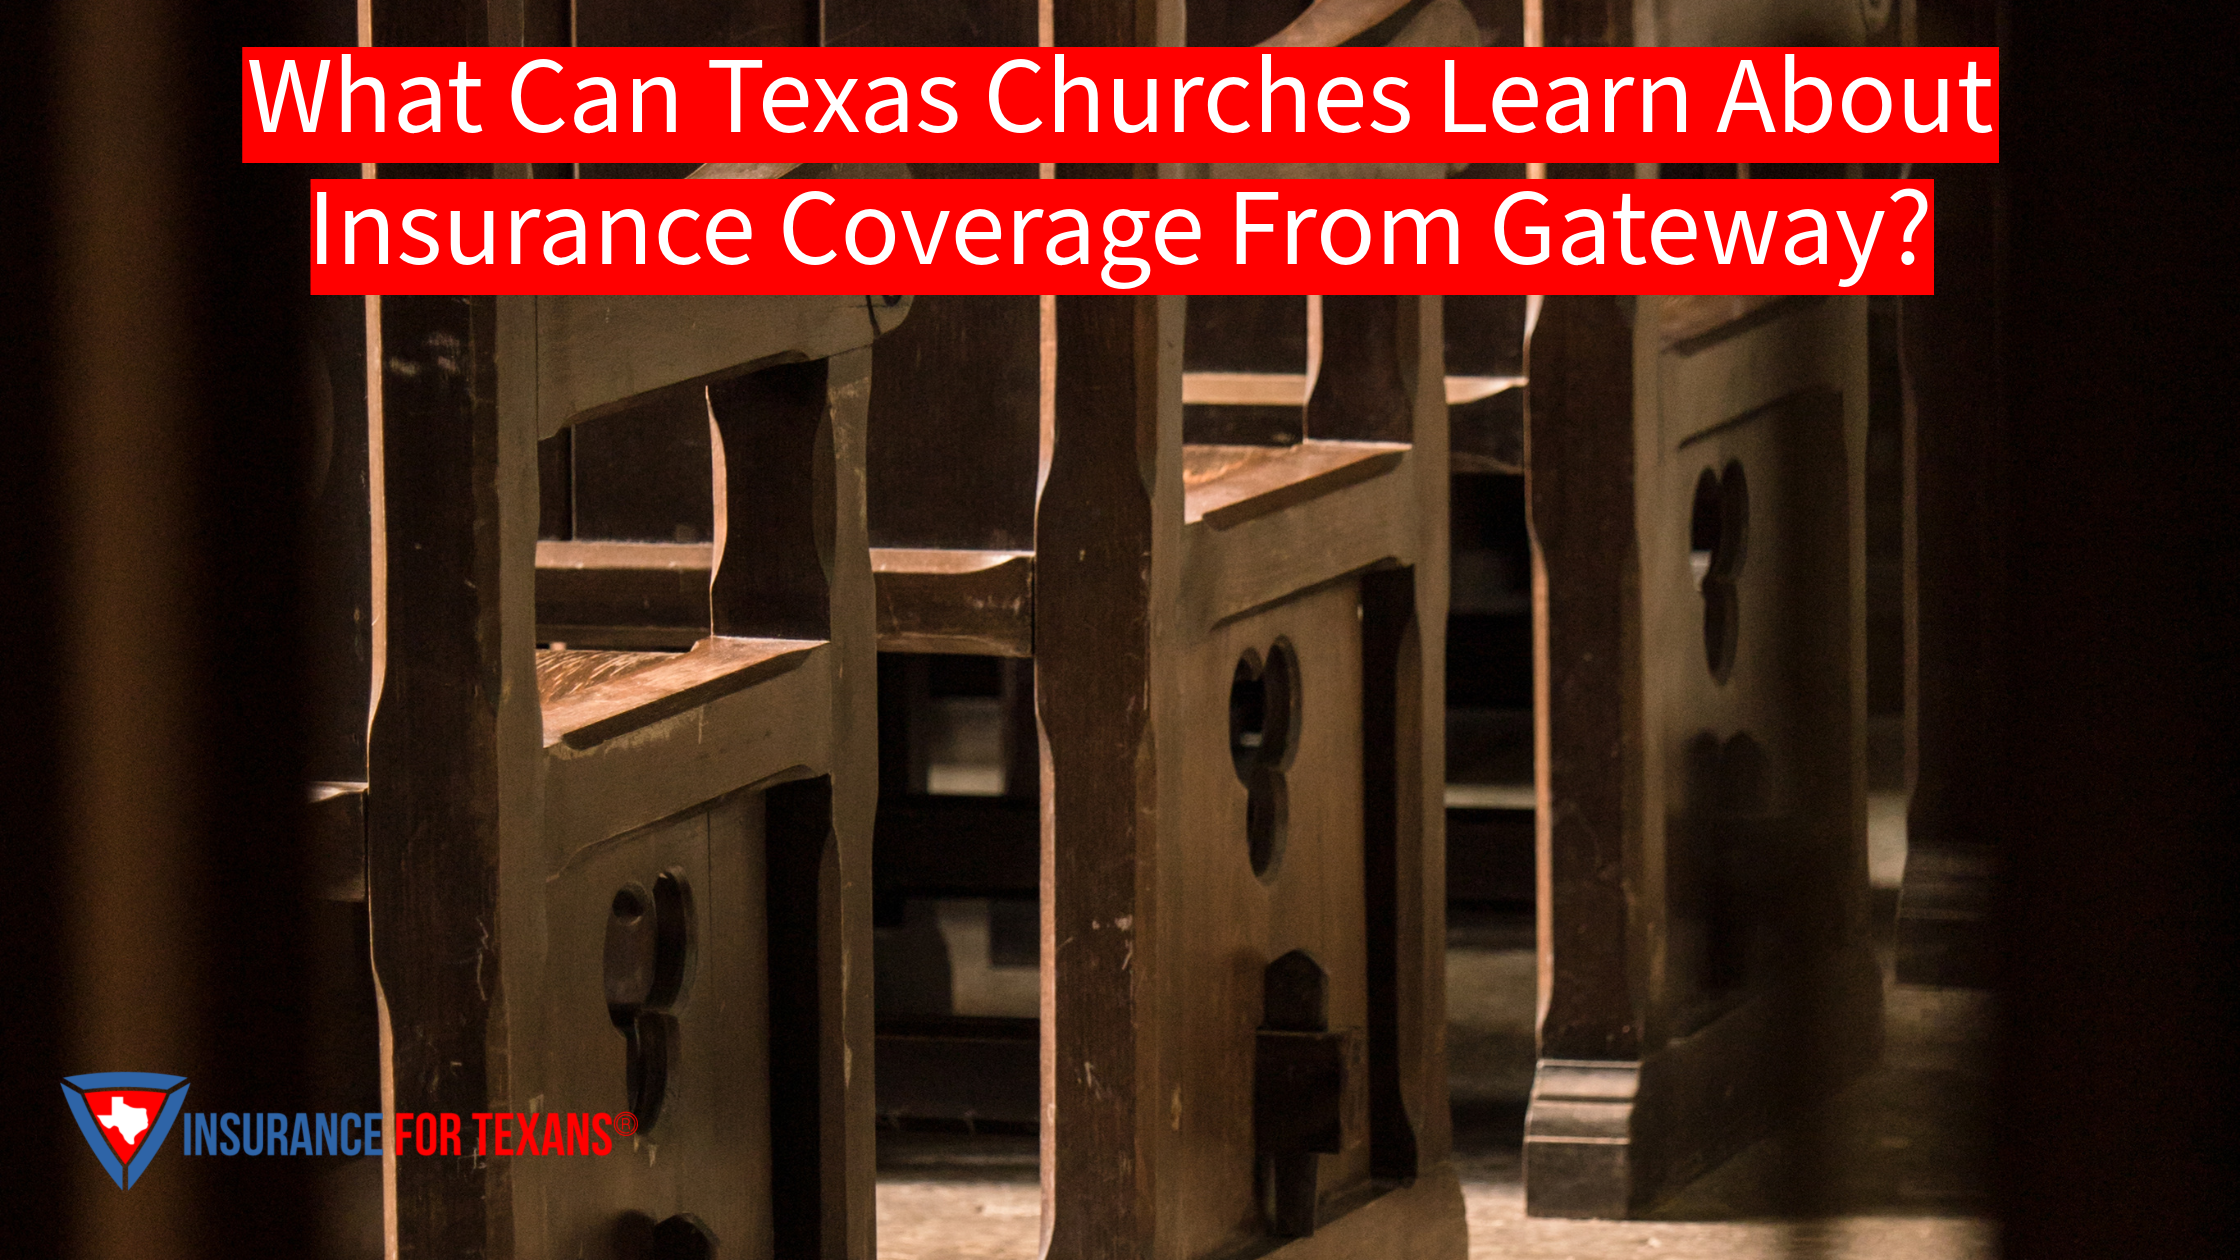 What Can Texas Churches Learn About Insurance Coverage From Gateway?